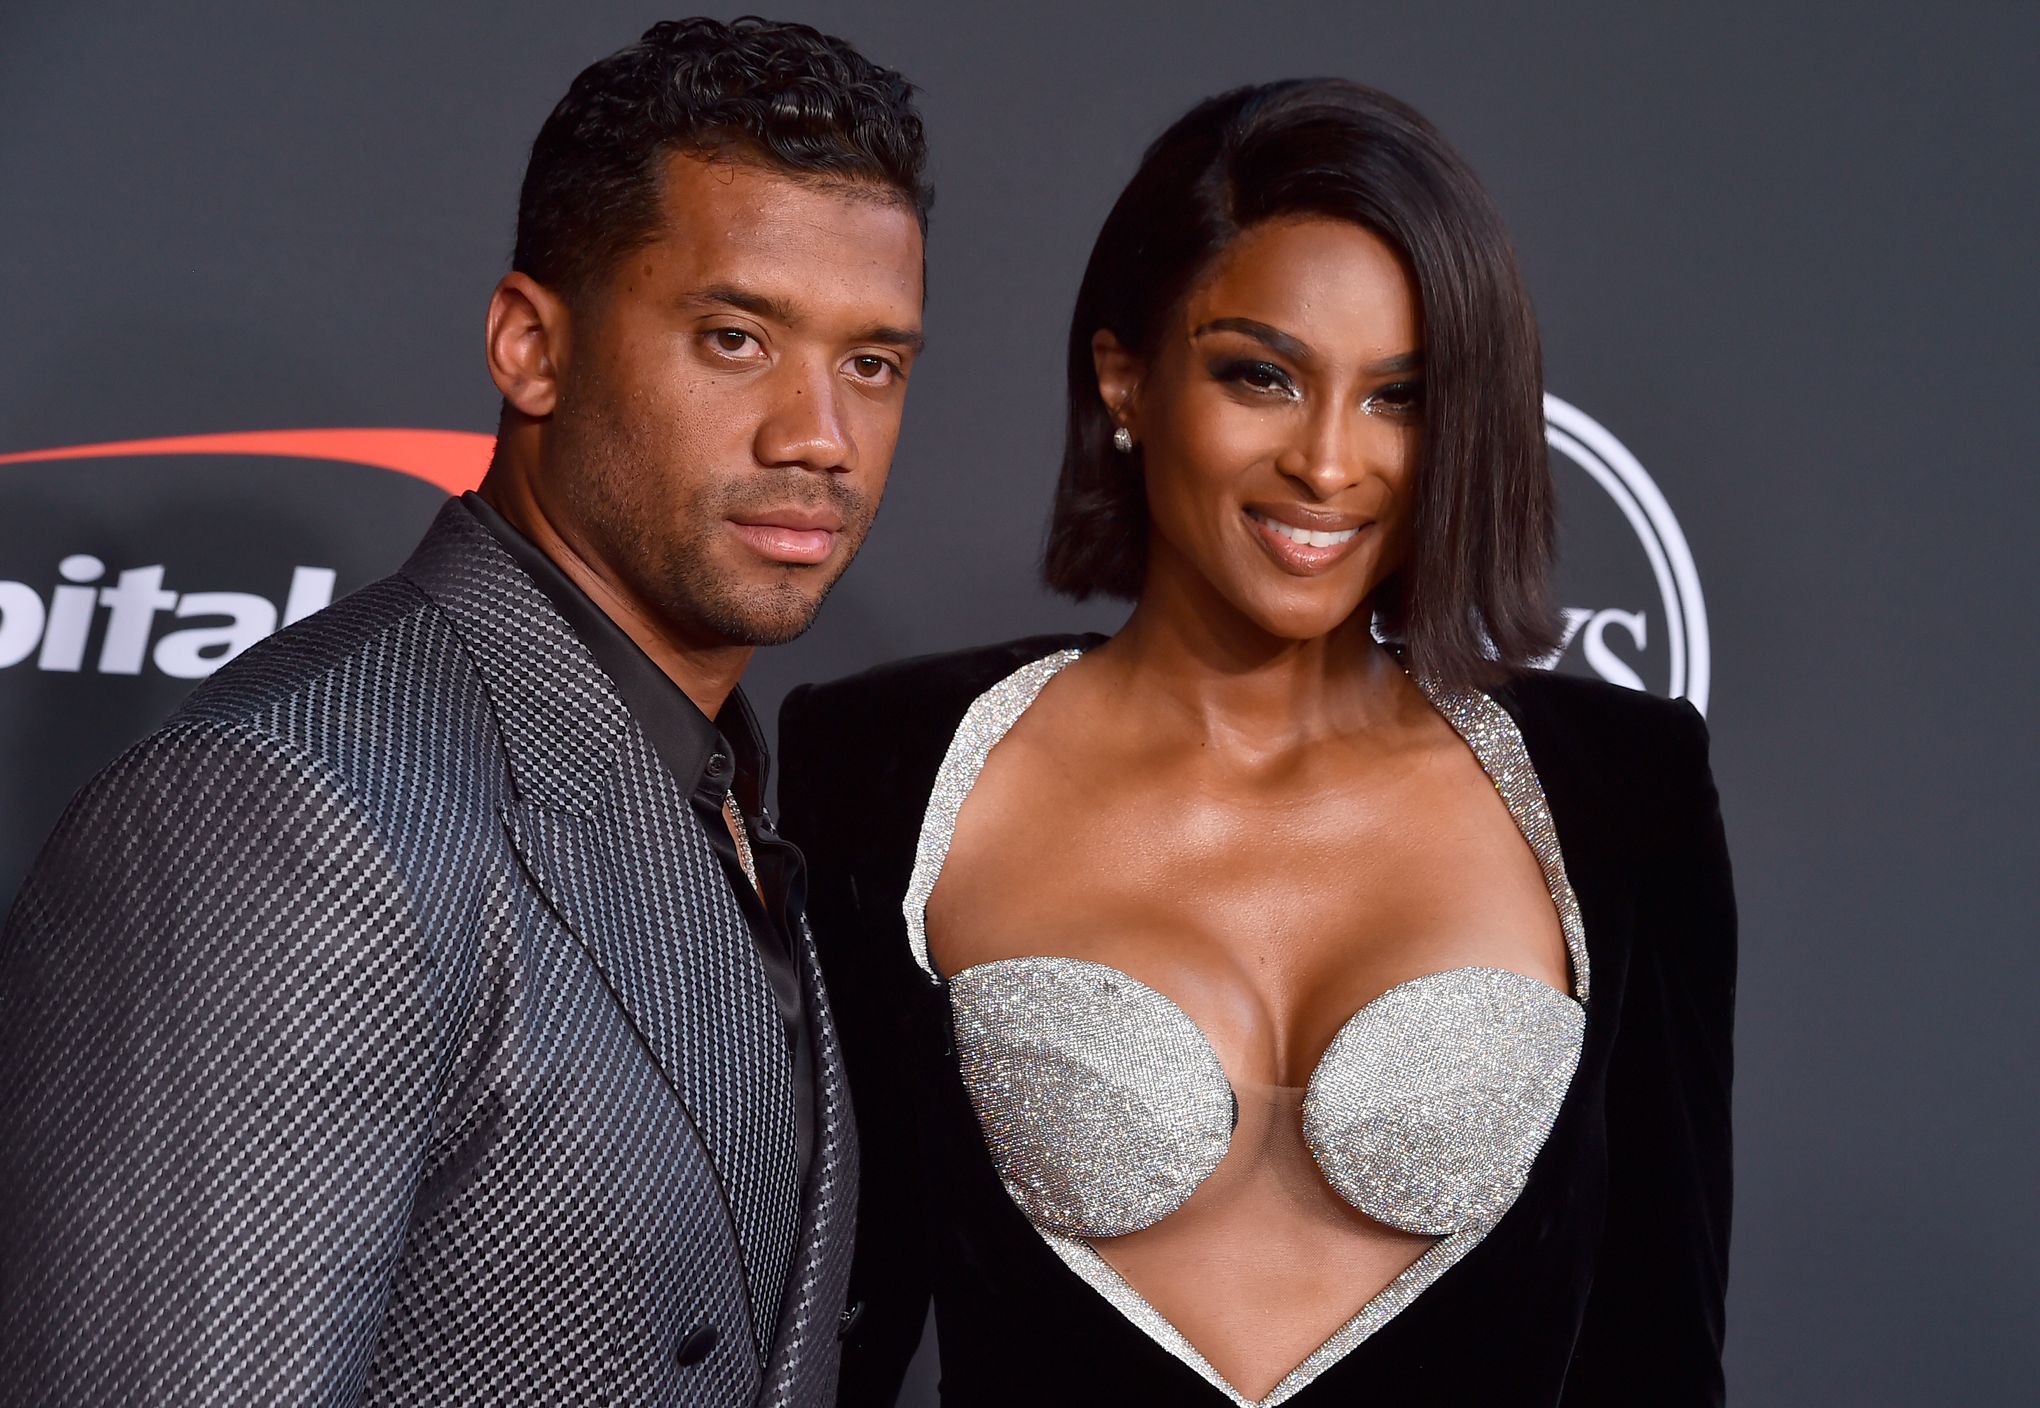 Russell Wilson to have third child with Ciara | The Seattle Times